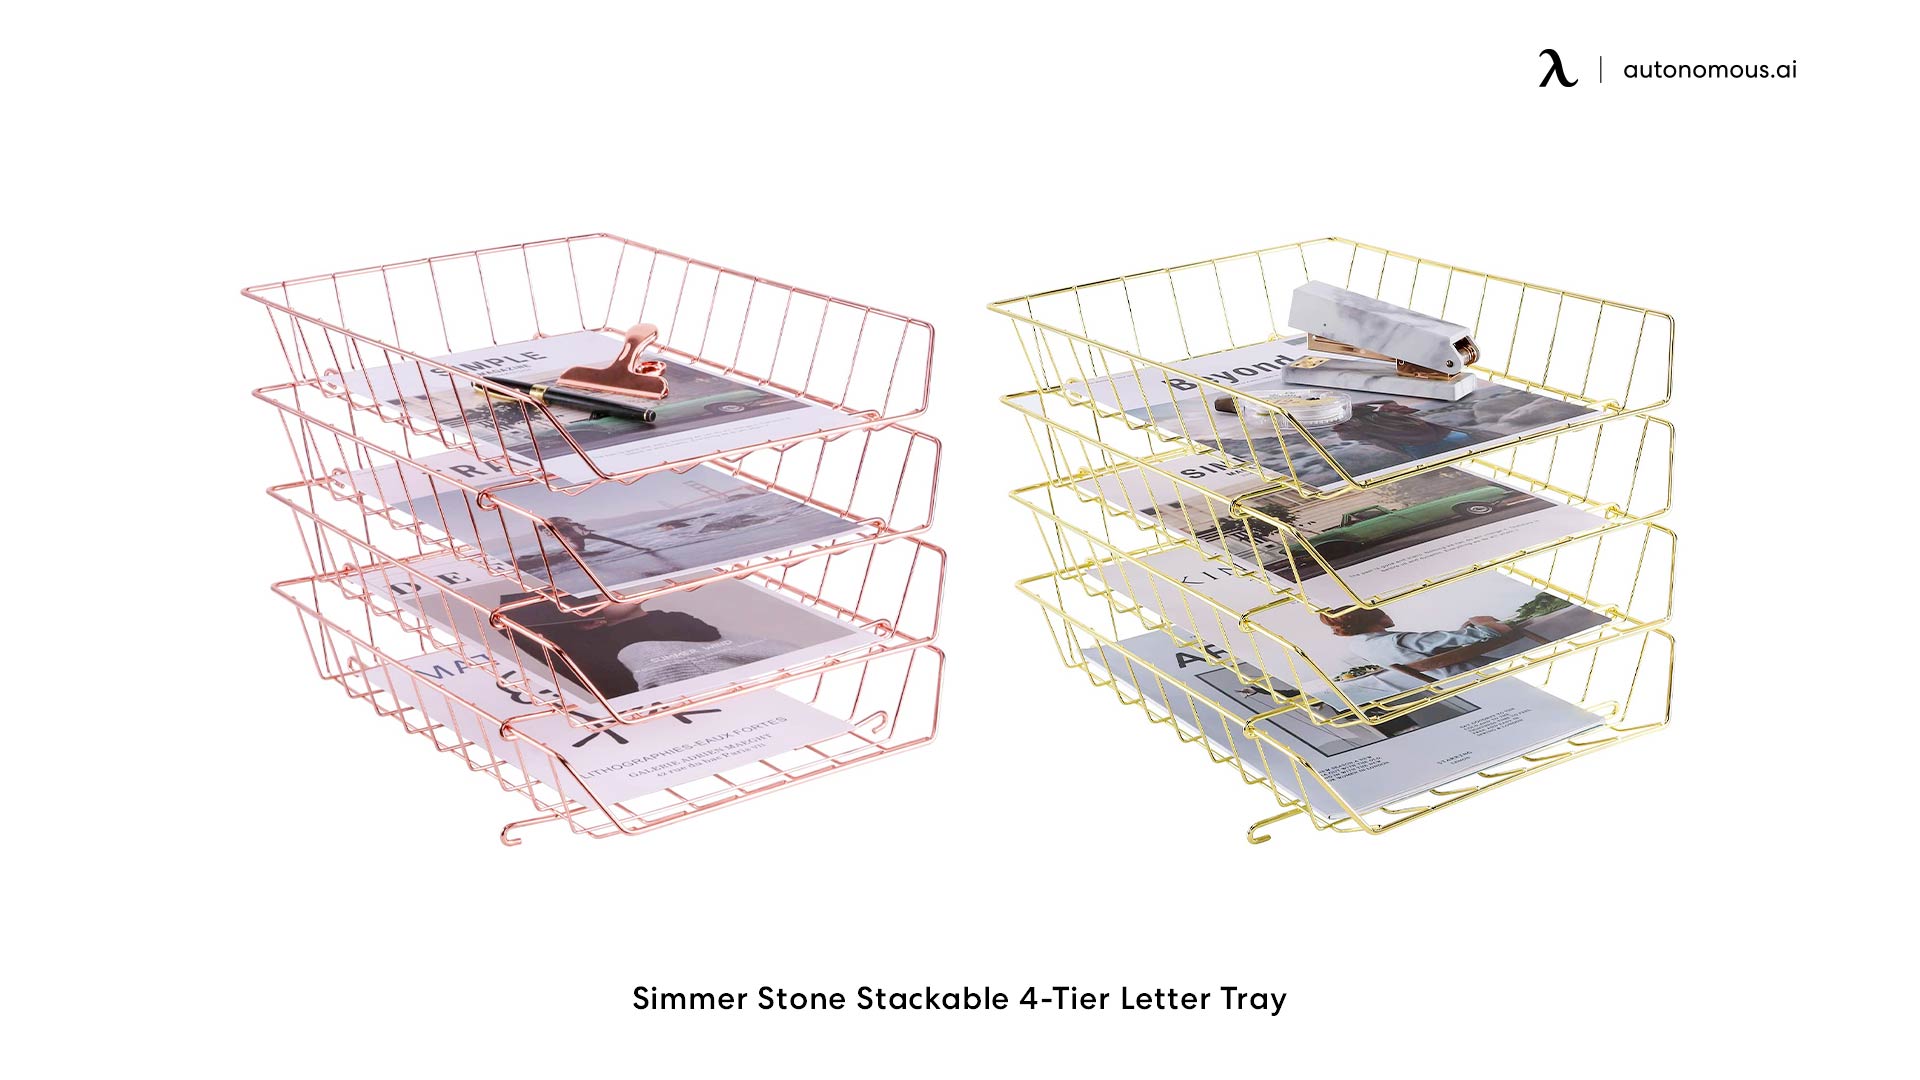 Simmer Stone Stackable 4-Tier Letter Tray